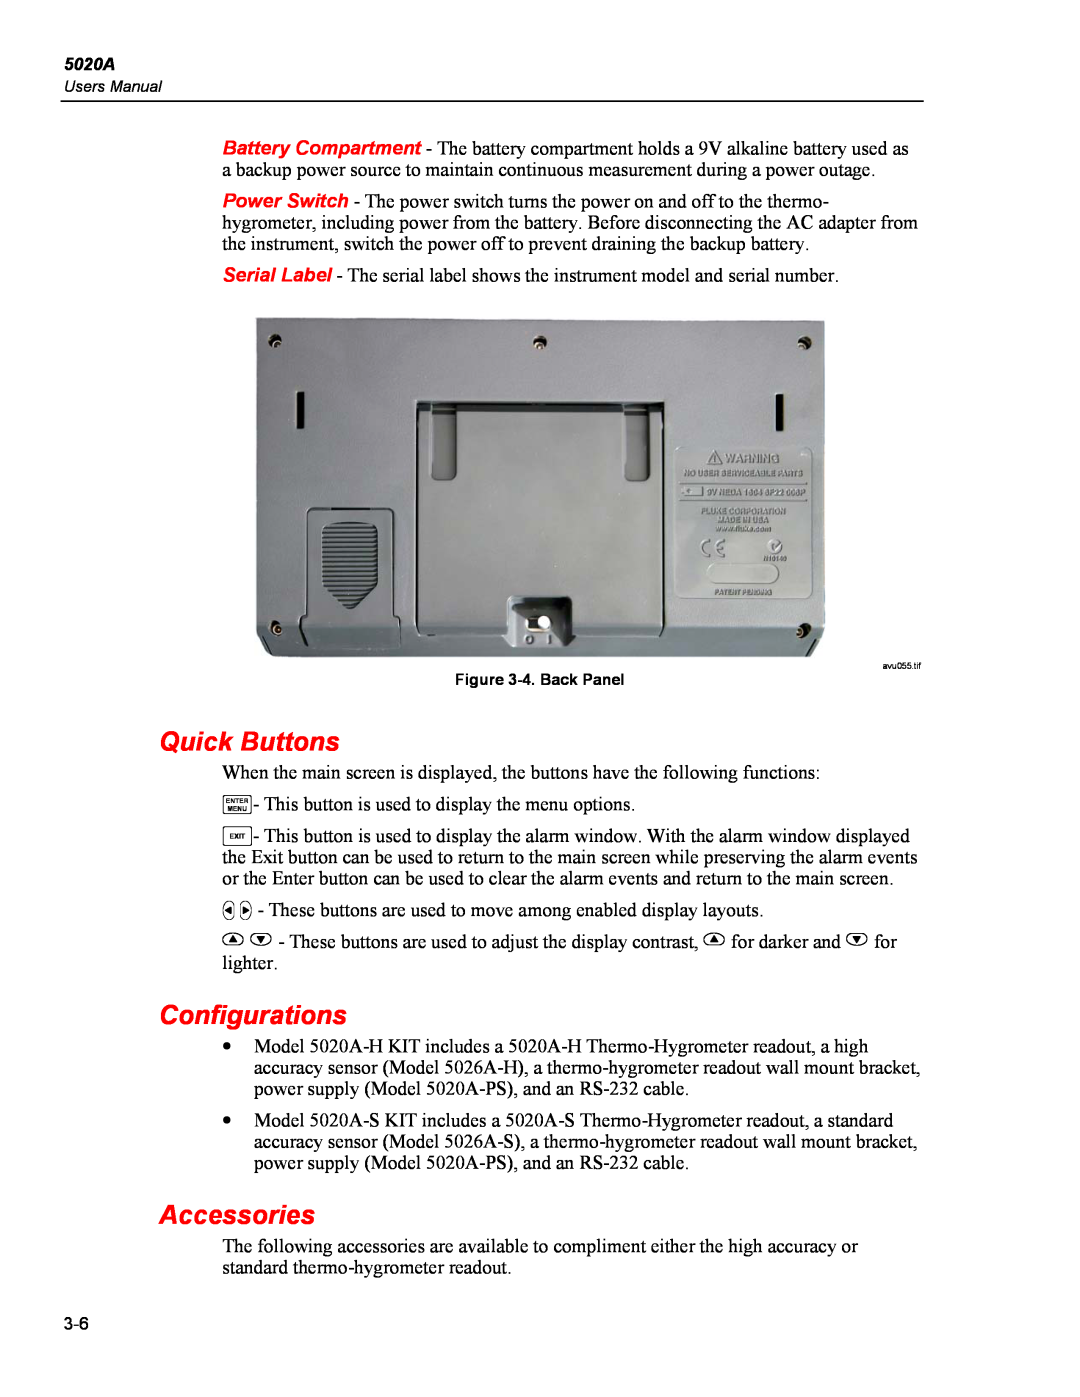 Fluke 5020A user manual Quick Buttons, Configurations, Accessories, 4. Back Panel 